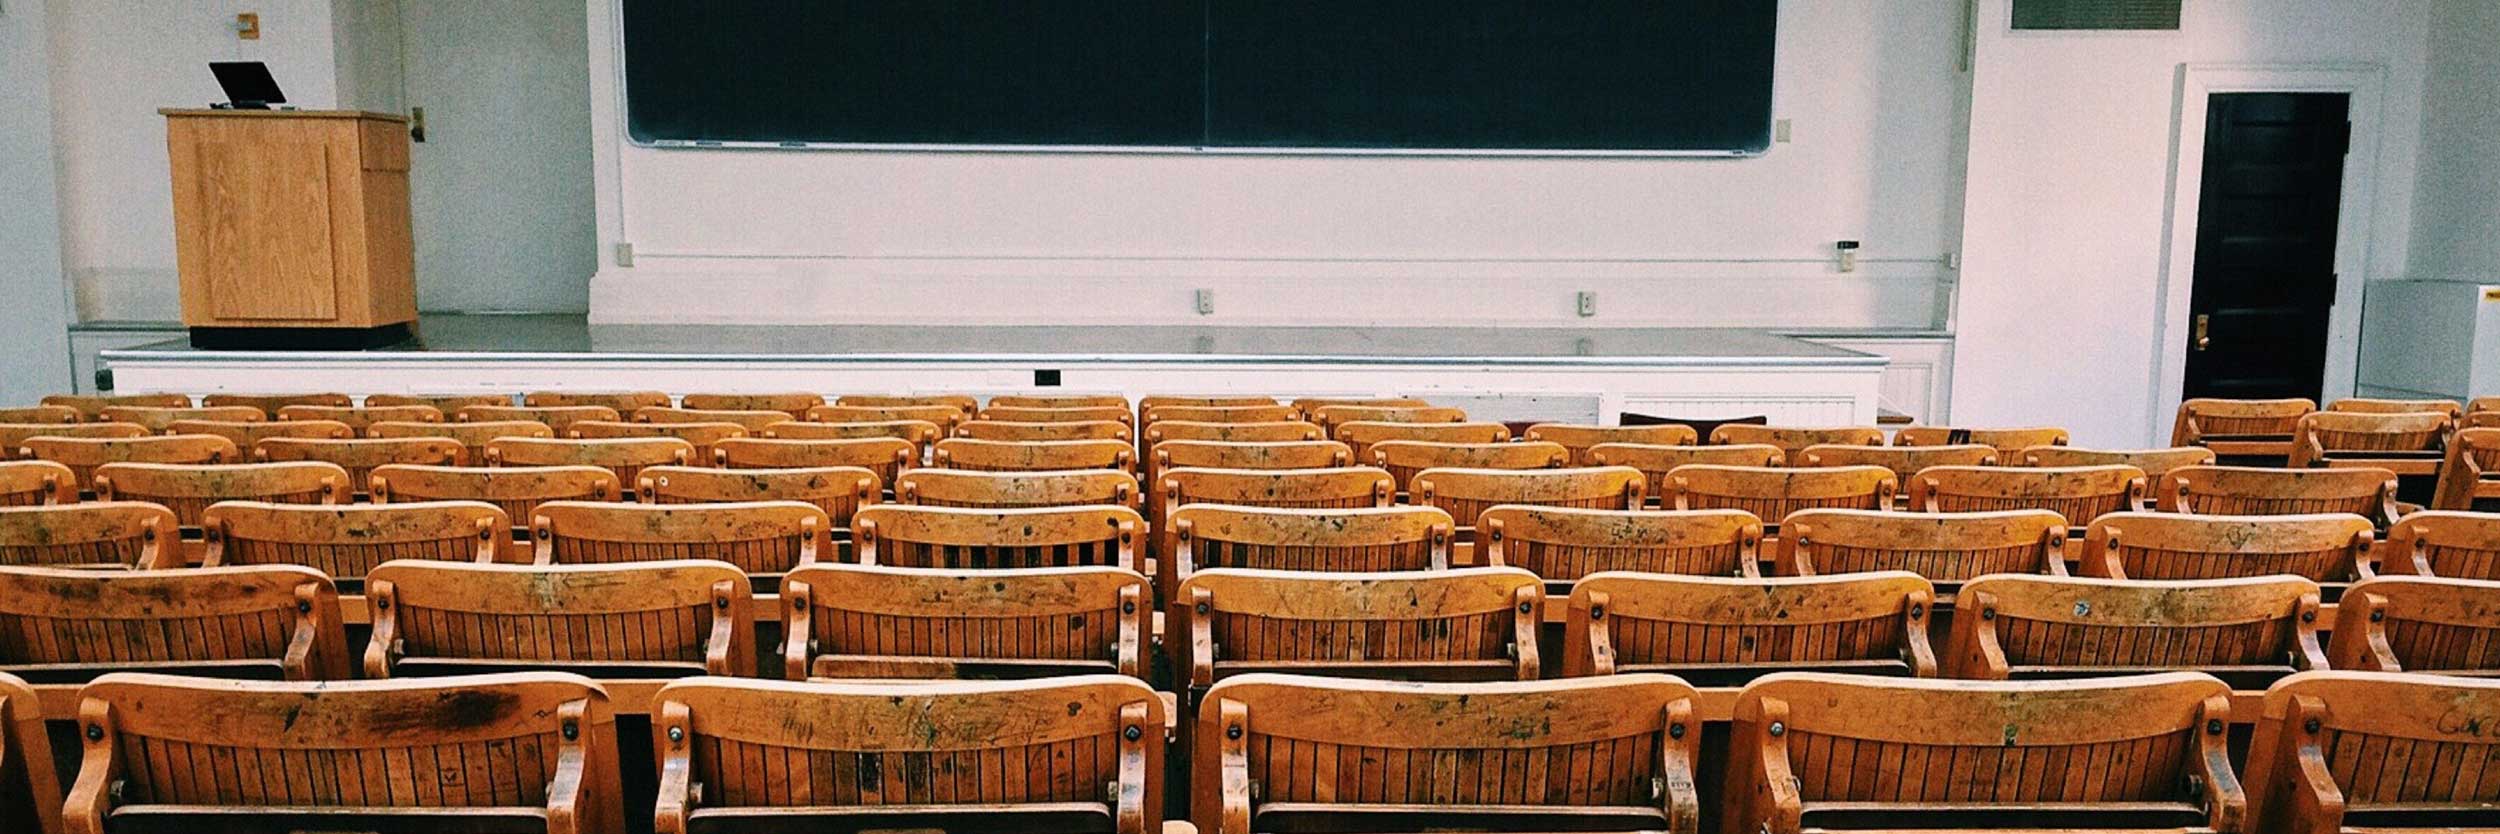 Rows of chairs awaiting students in a university lecture hall